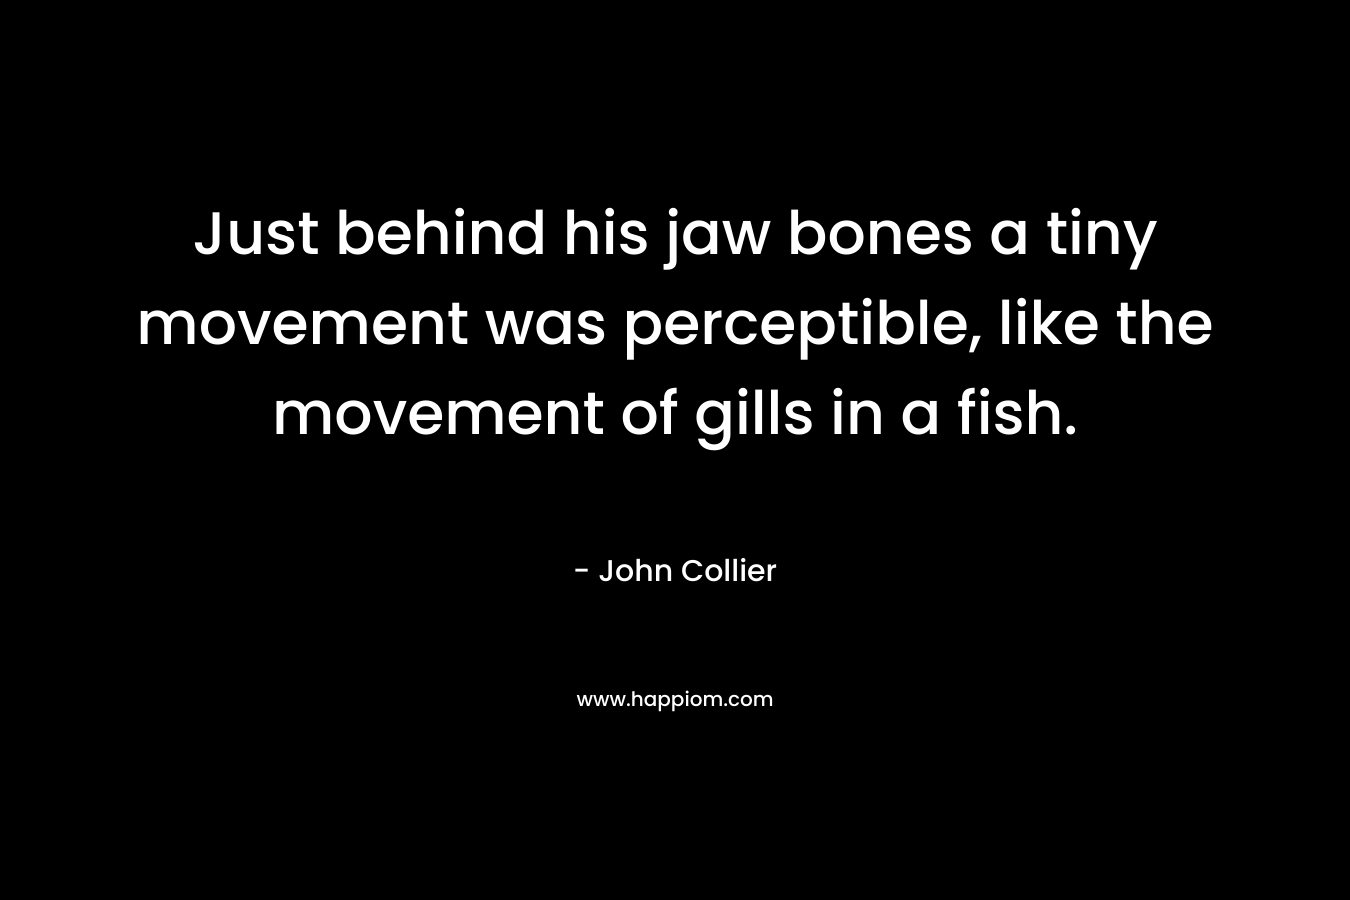 Just behind his jaw bones a tiny movement was perceptible, like the movement of gills in a fish.